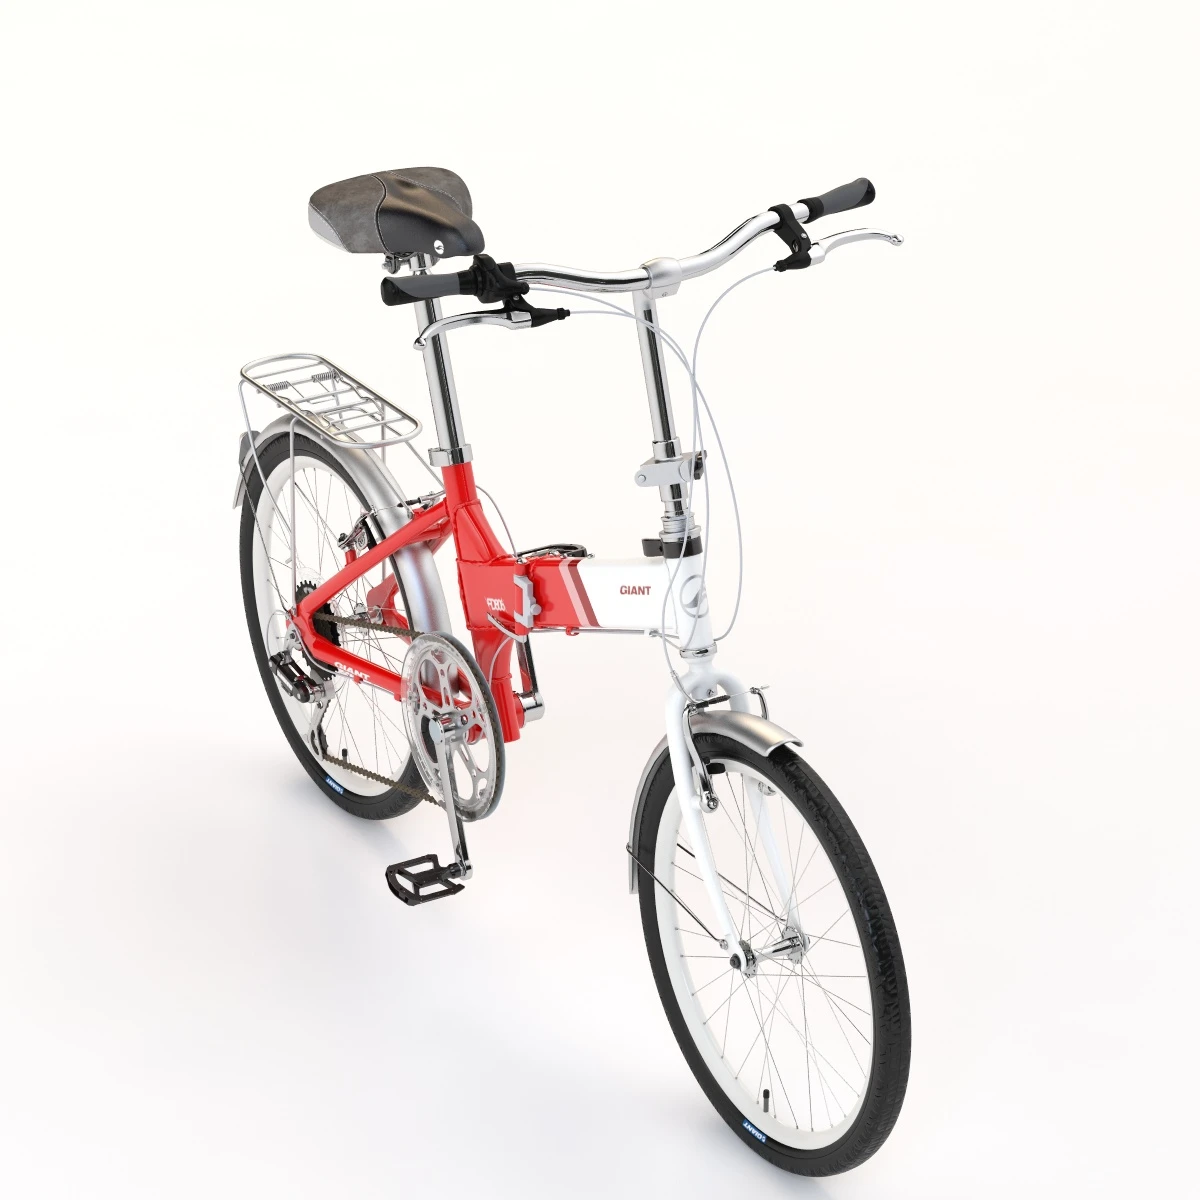 Giant Fd806 Lightweight Red-White Folding Bicycle 3D Model_05